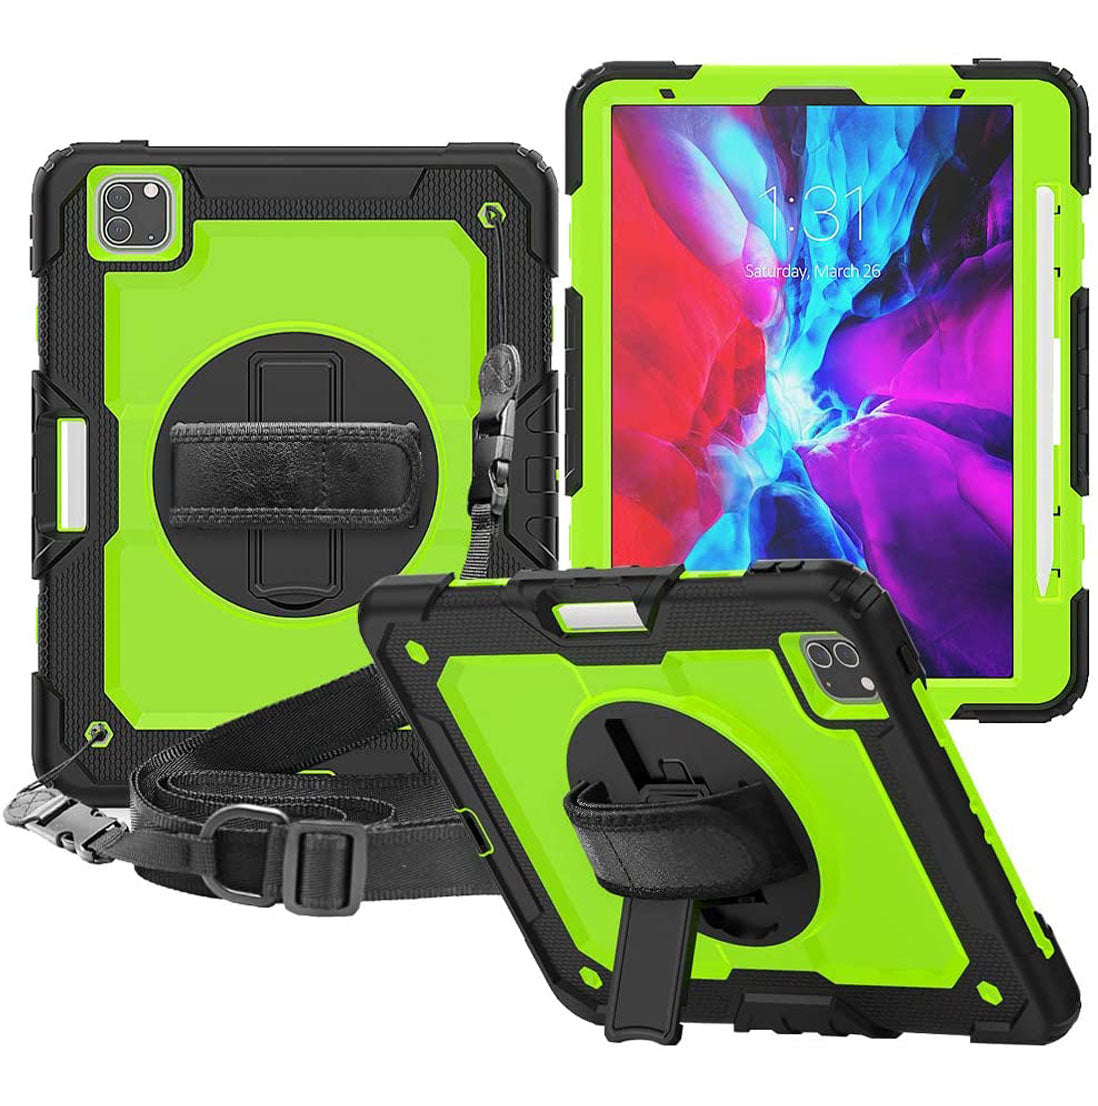 Case for iPad Pro 12.9 2020 With Strap for iPad Pro 12.9 inch 2020 (4th Generation)